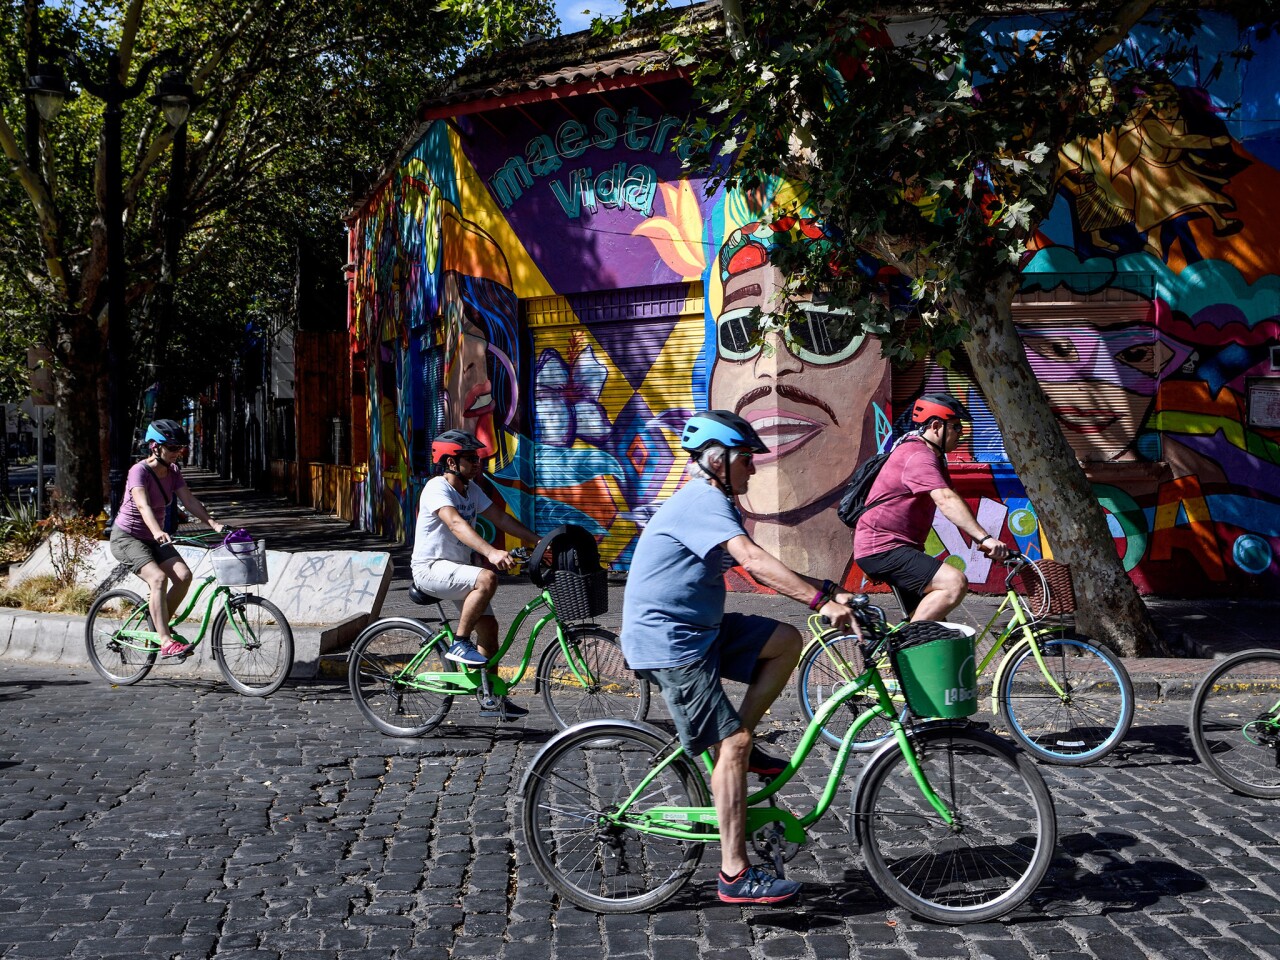 A group of tourists ride rental bicycles through the Bellavista neighborhood of Santiago, Chile.